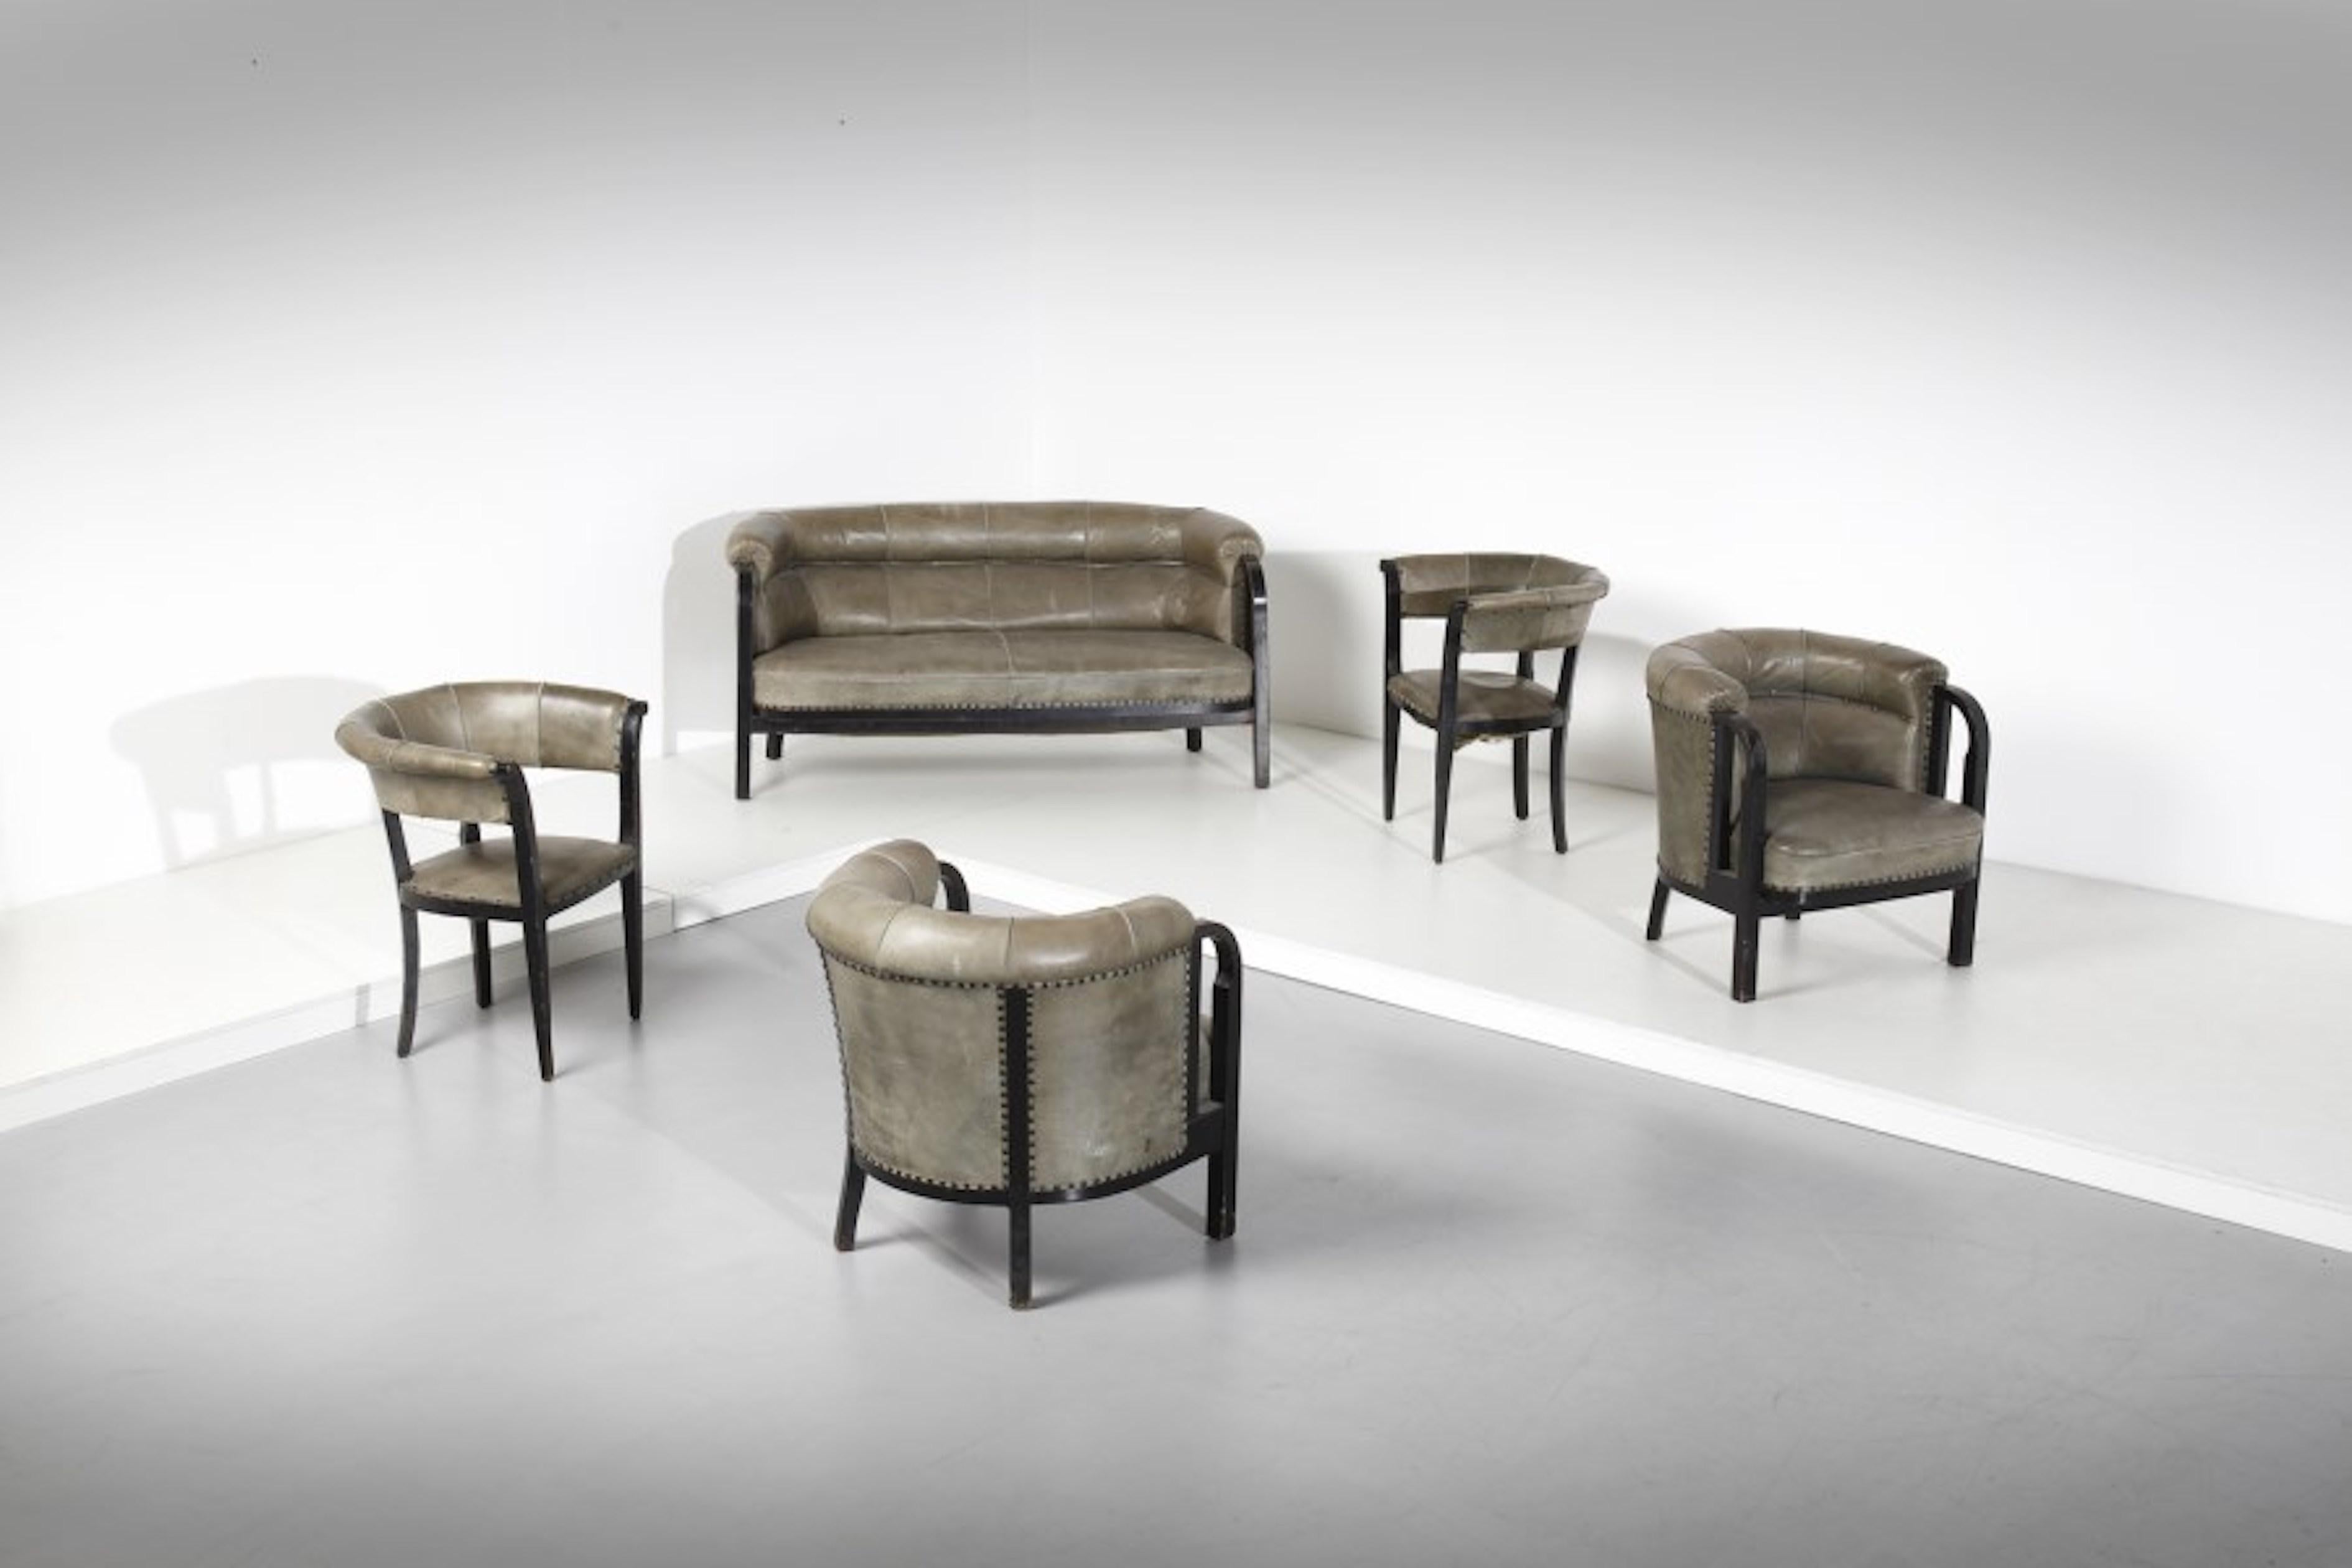 Vienna Secession Thonet Chairs  Nr. 6533, Marcel Kammerer, Vienna from 1910